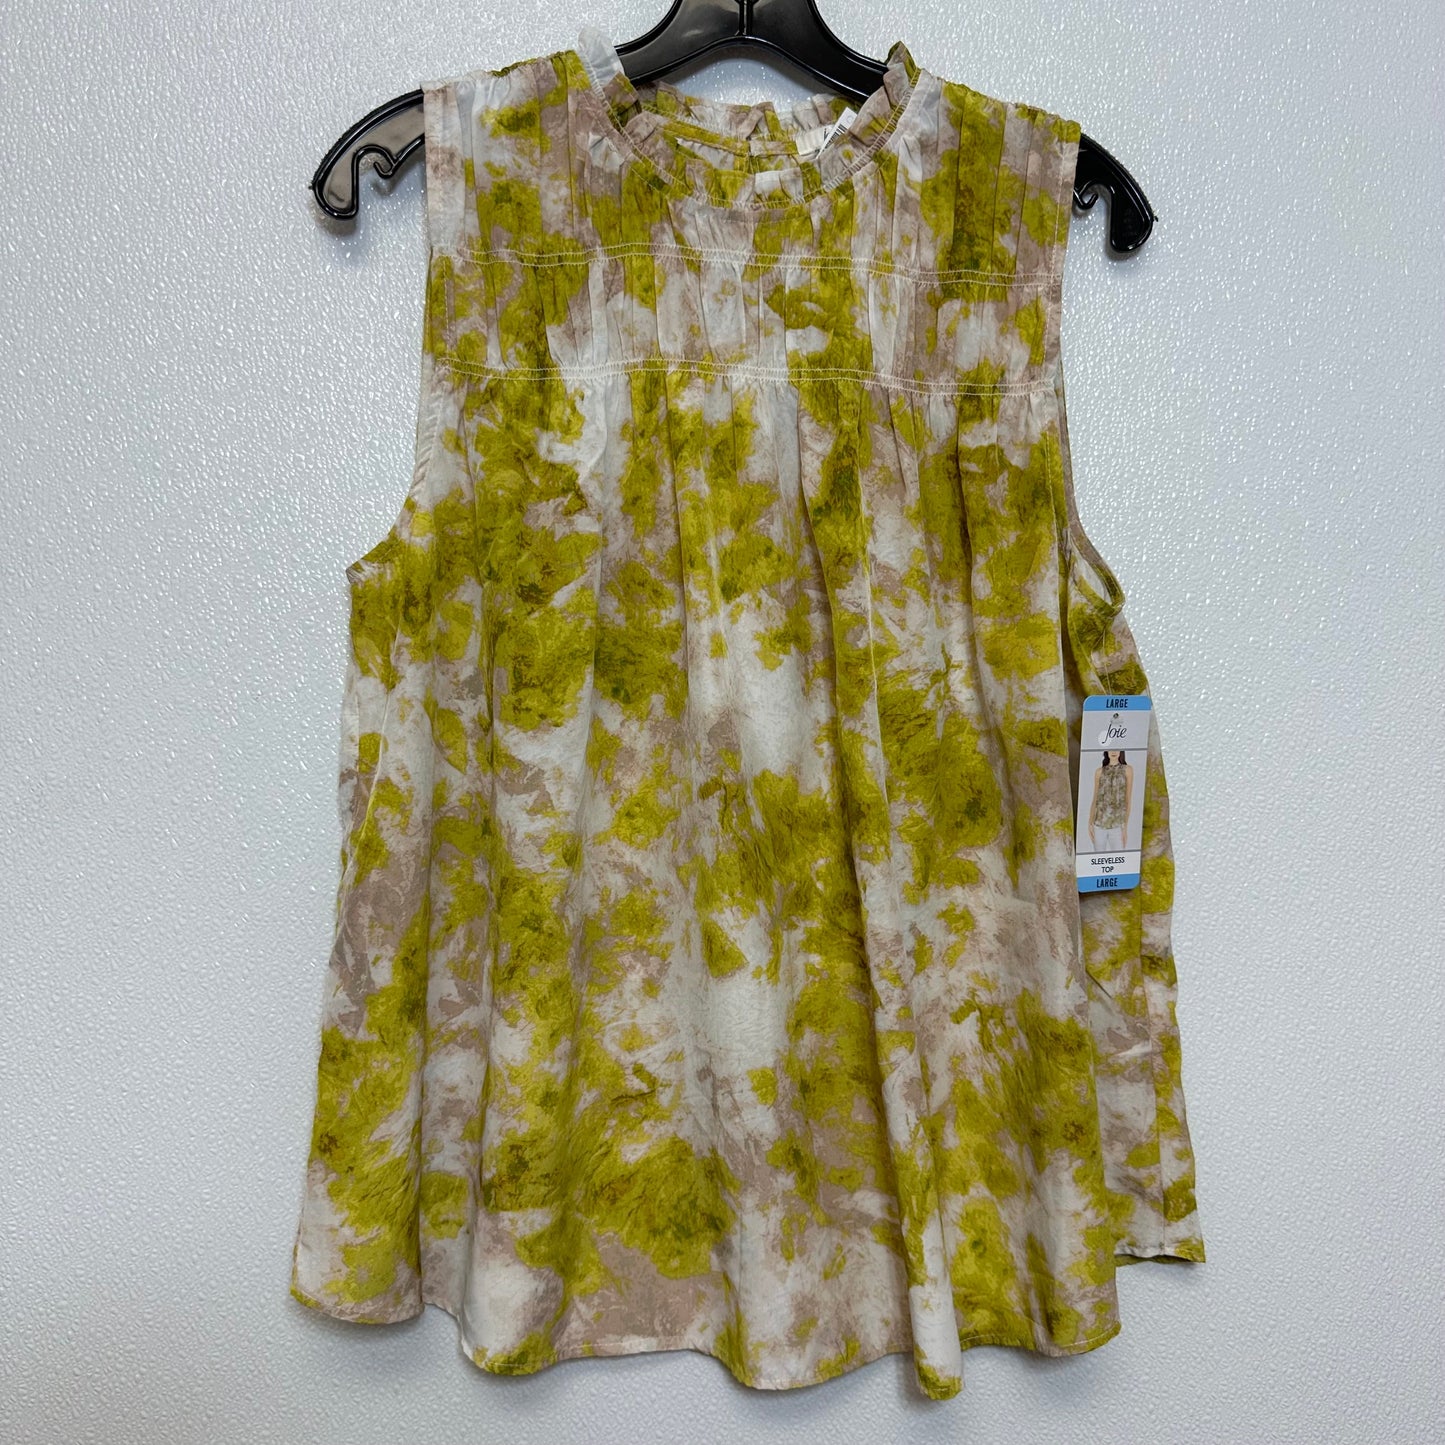 Top Sleeveless By Joie  Size: L